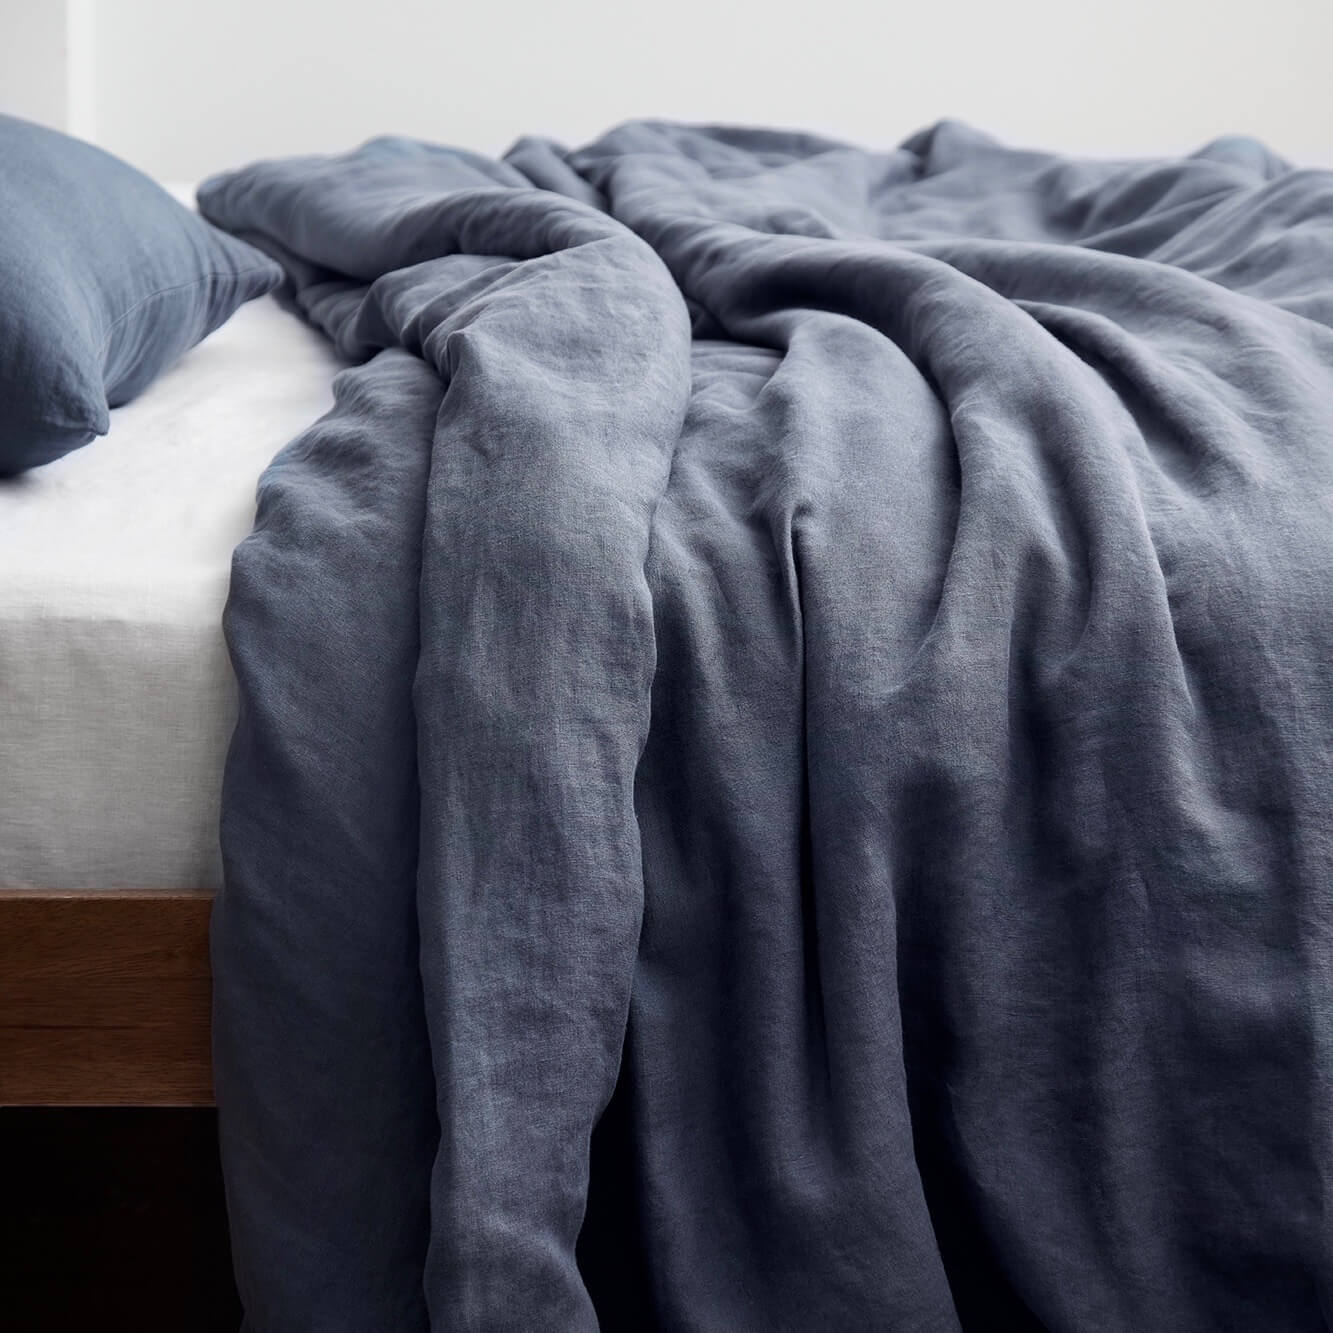 The Citizenry Stonewashed Linen Duvet Cover | King/Cal King | Duvet Only | Solid Sand - Image 9